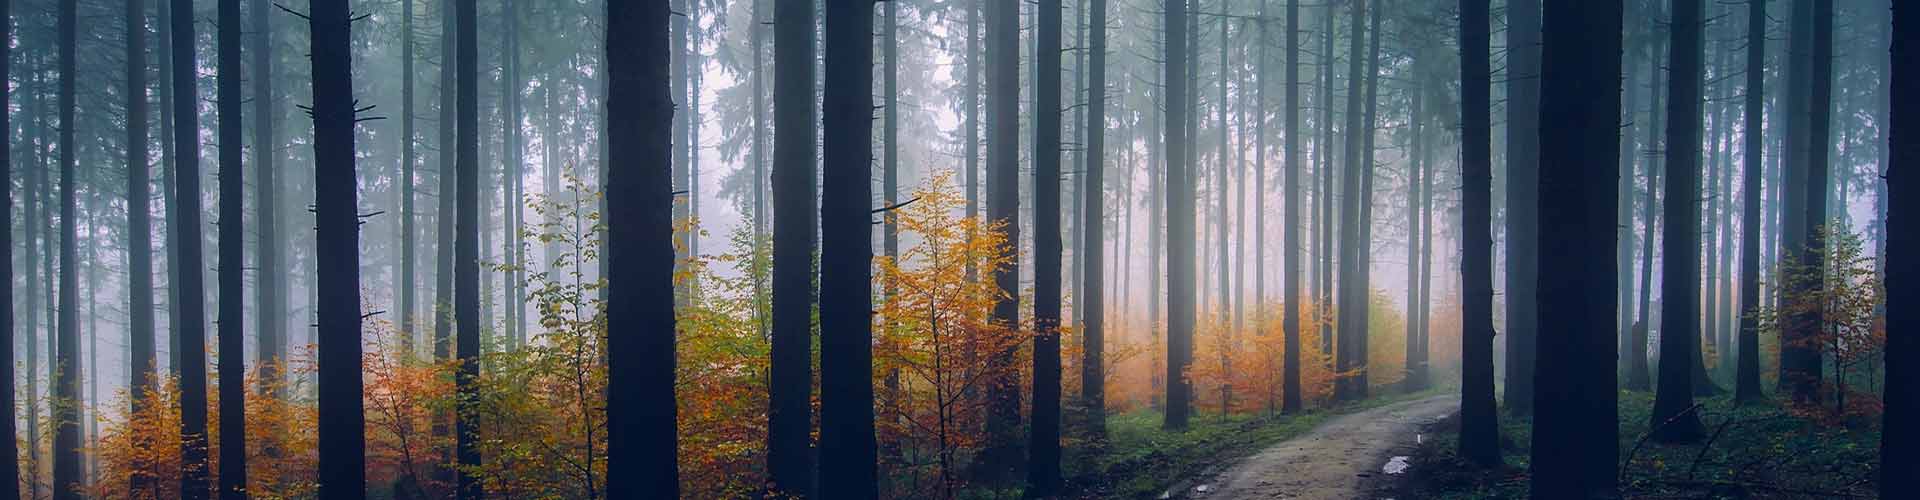 Shinrin-Yoku: Experience EMF Relief with Forest Bathing!